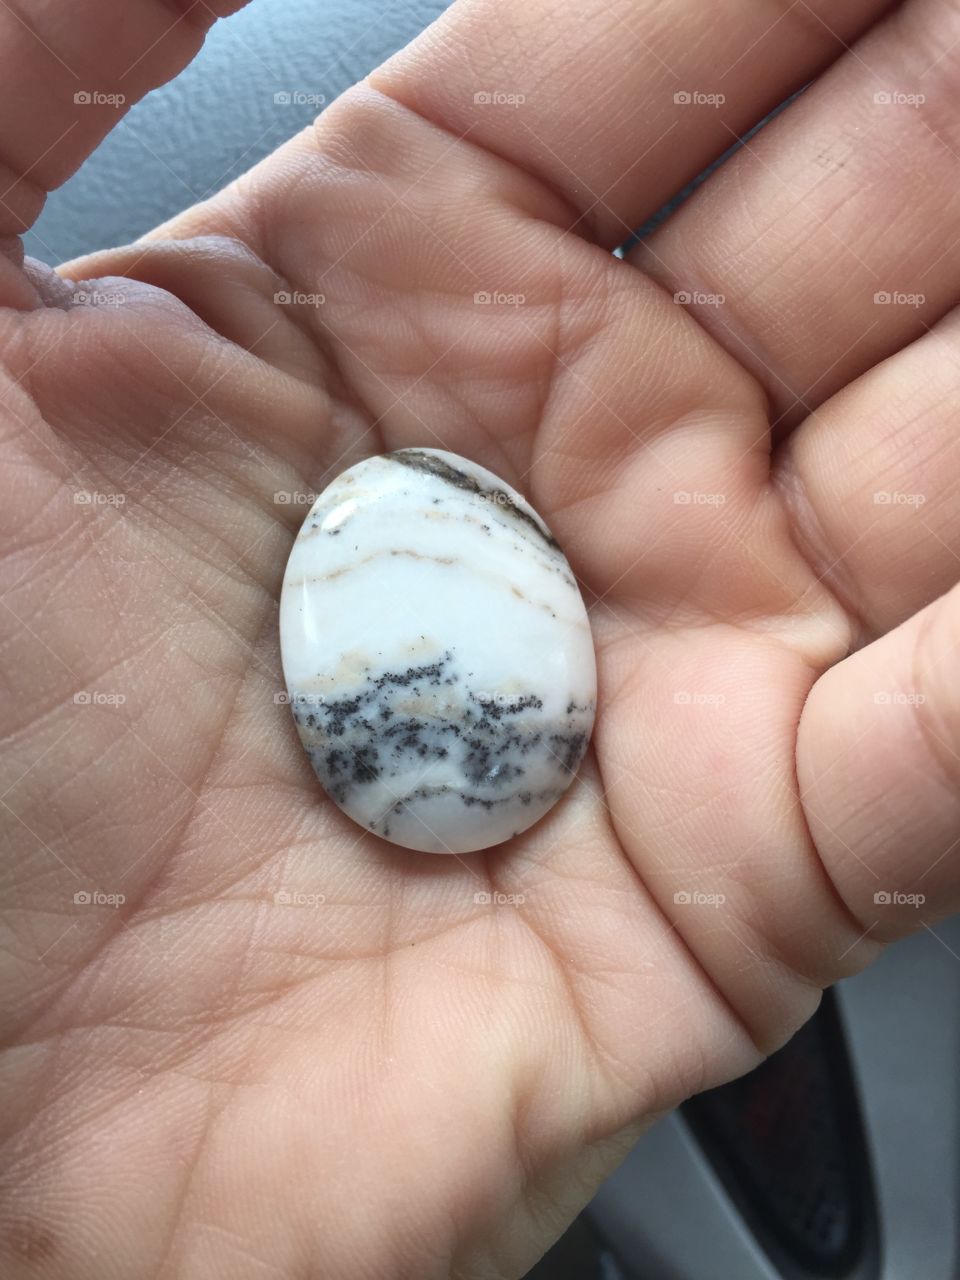 Grey White Tan Oval Stone Cabochon in palm of Hand 